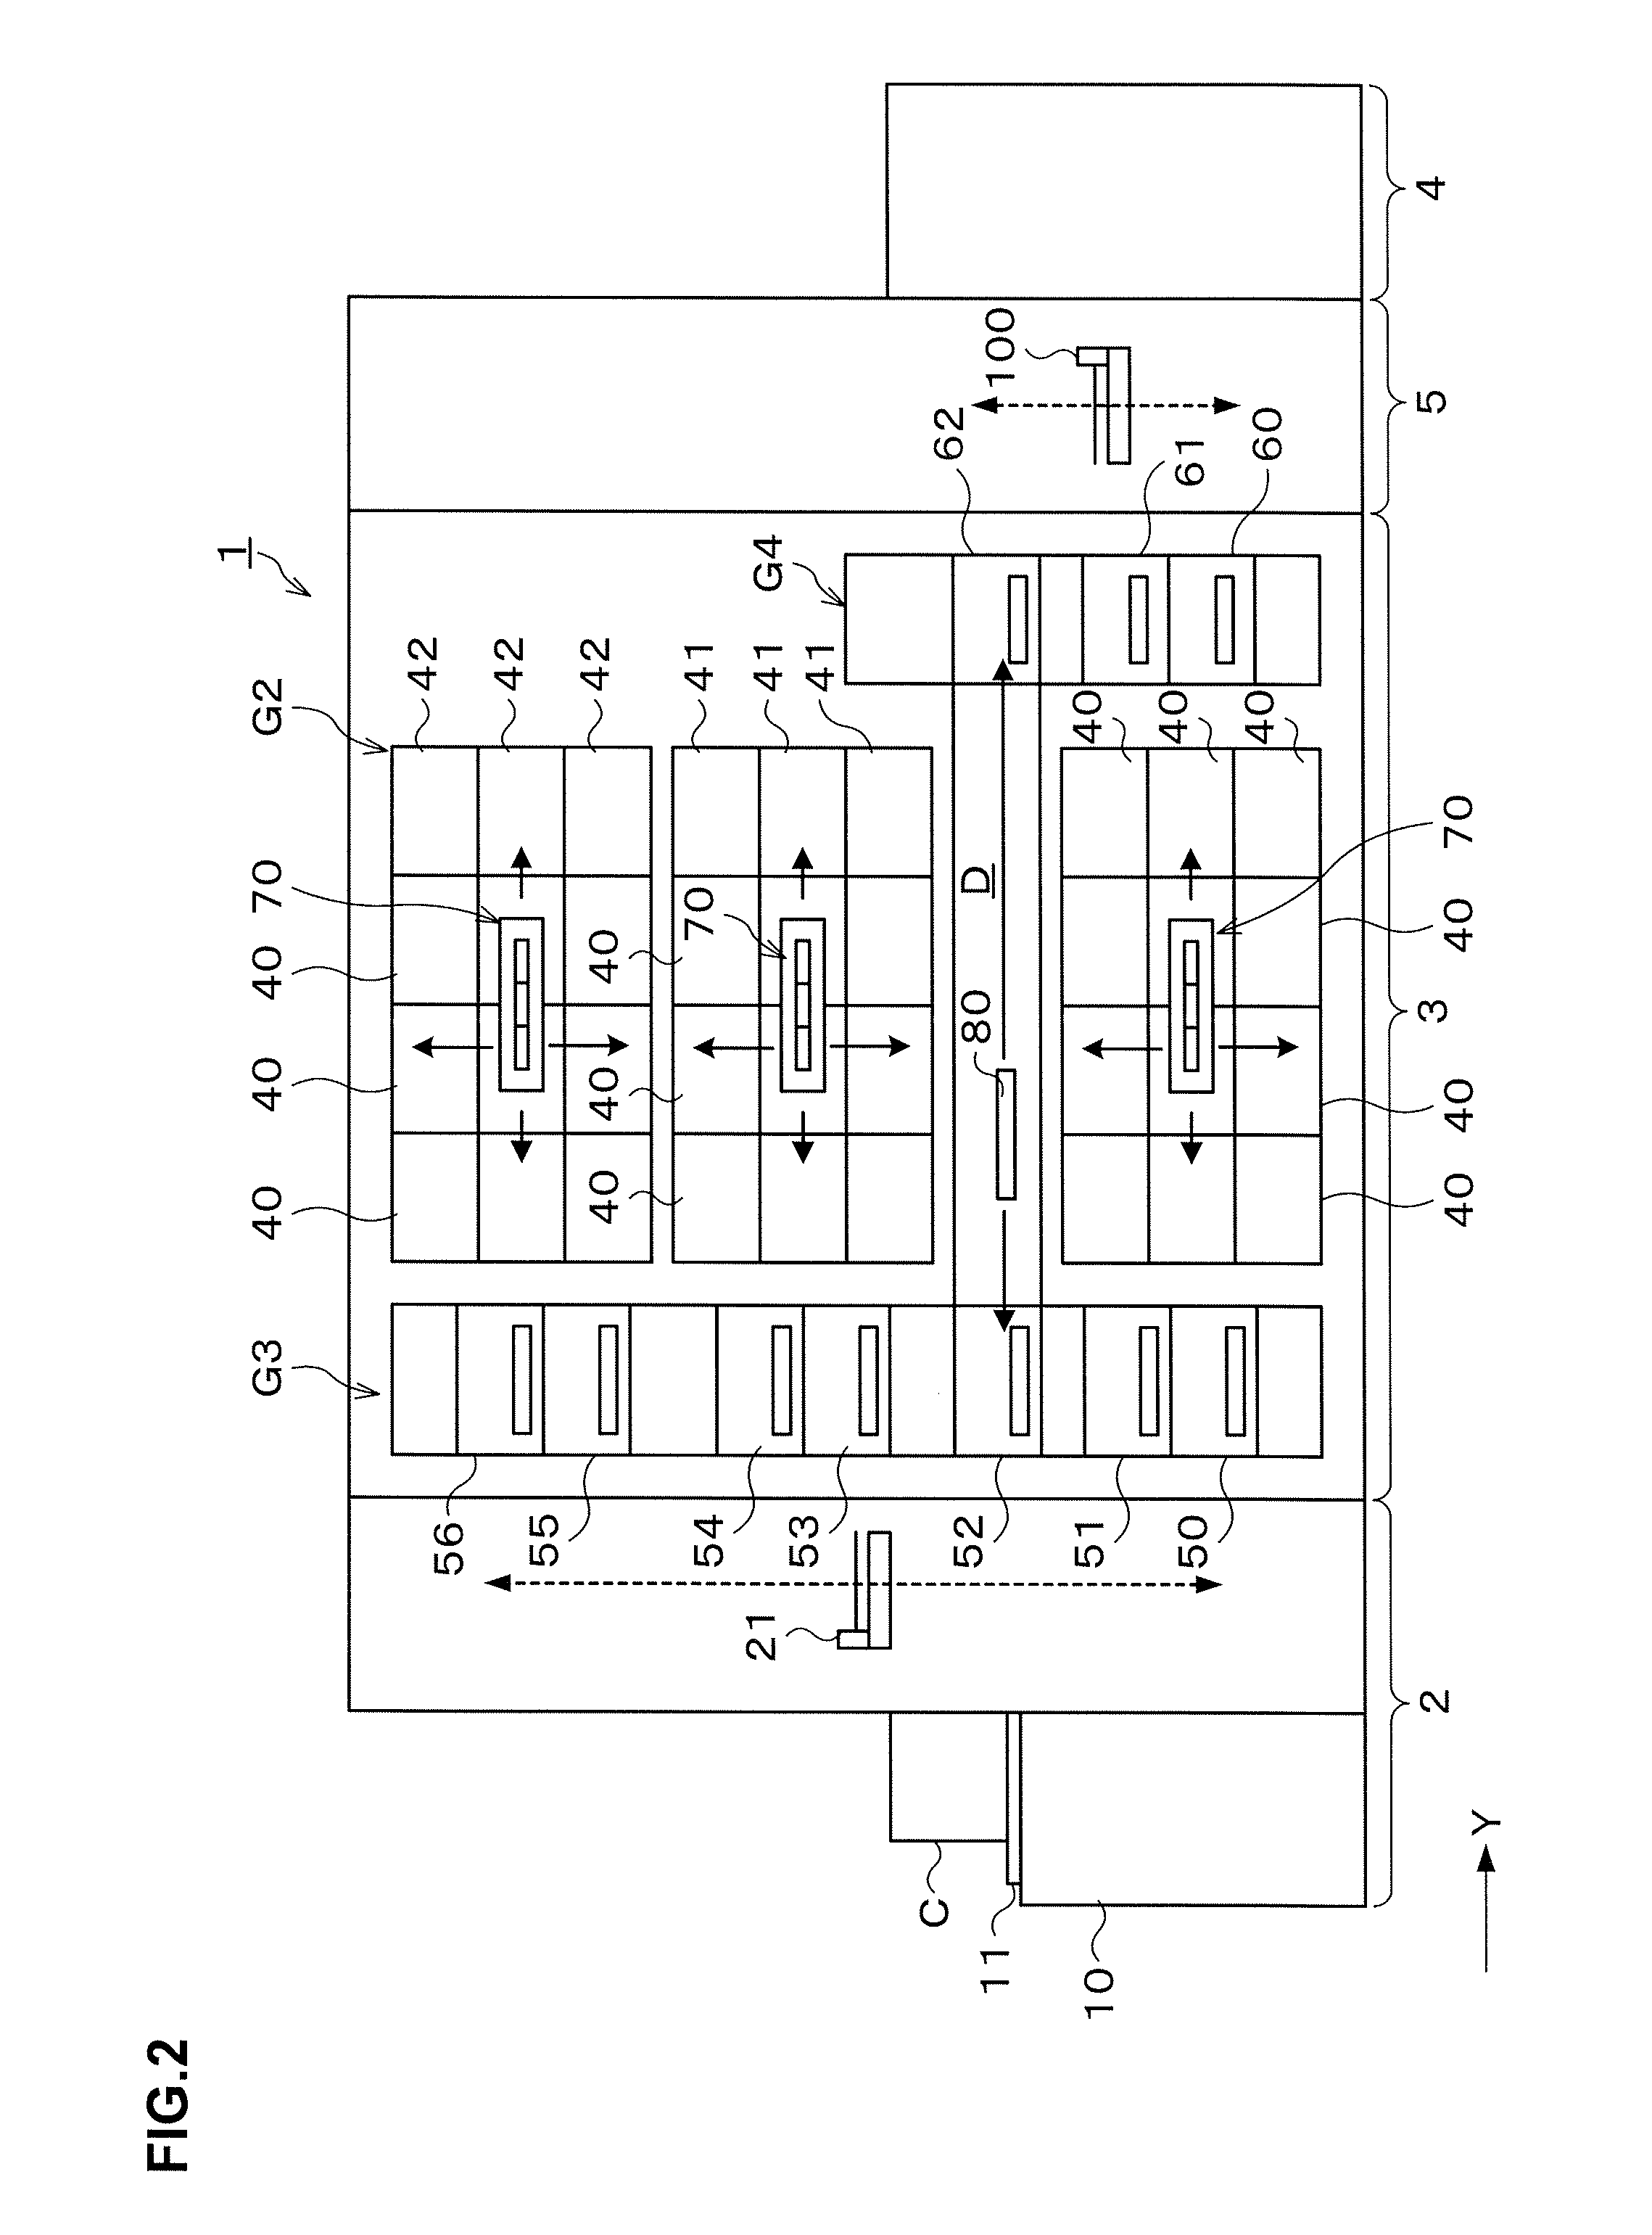 Substrate processing apparatus, substrate processing method and non-transitory computer storage medium